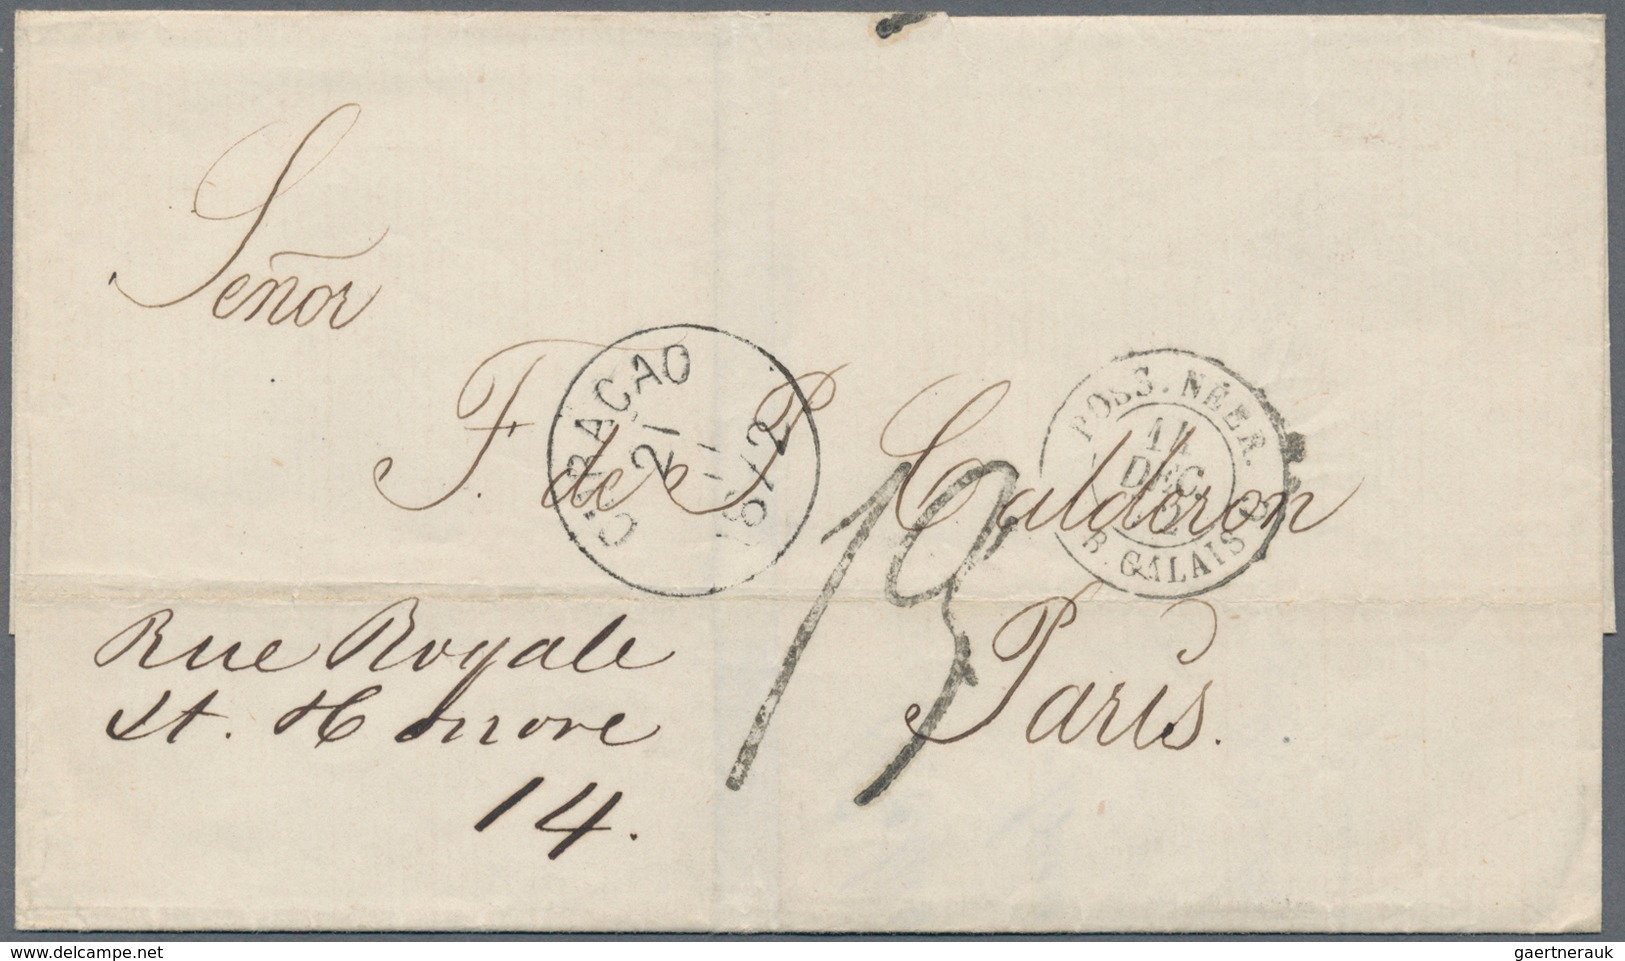 Curacao: 1872, Stampless Letter-sheet From CURACAO, 21.11.1872, To Paris In France, On The Frontside - Curacao, Netherlands Antilles, Aruba